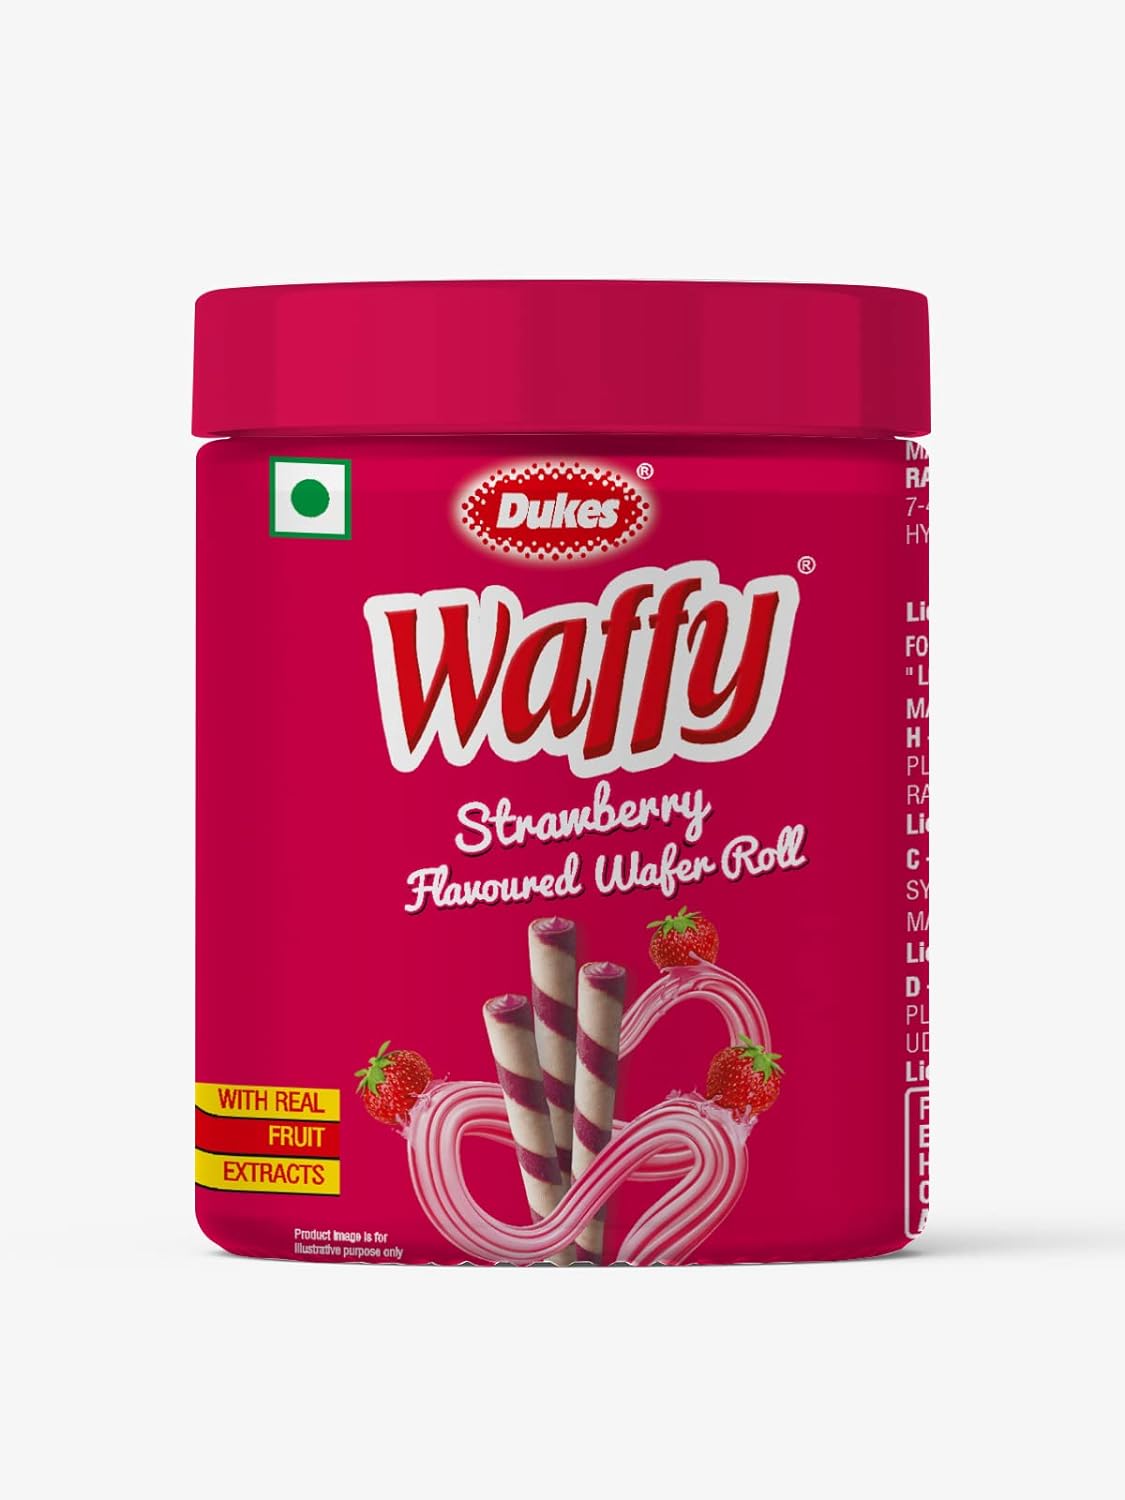 Dukes/ Waffy/ Strawberry Flavoured Wafer Roll (250gm)